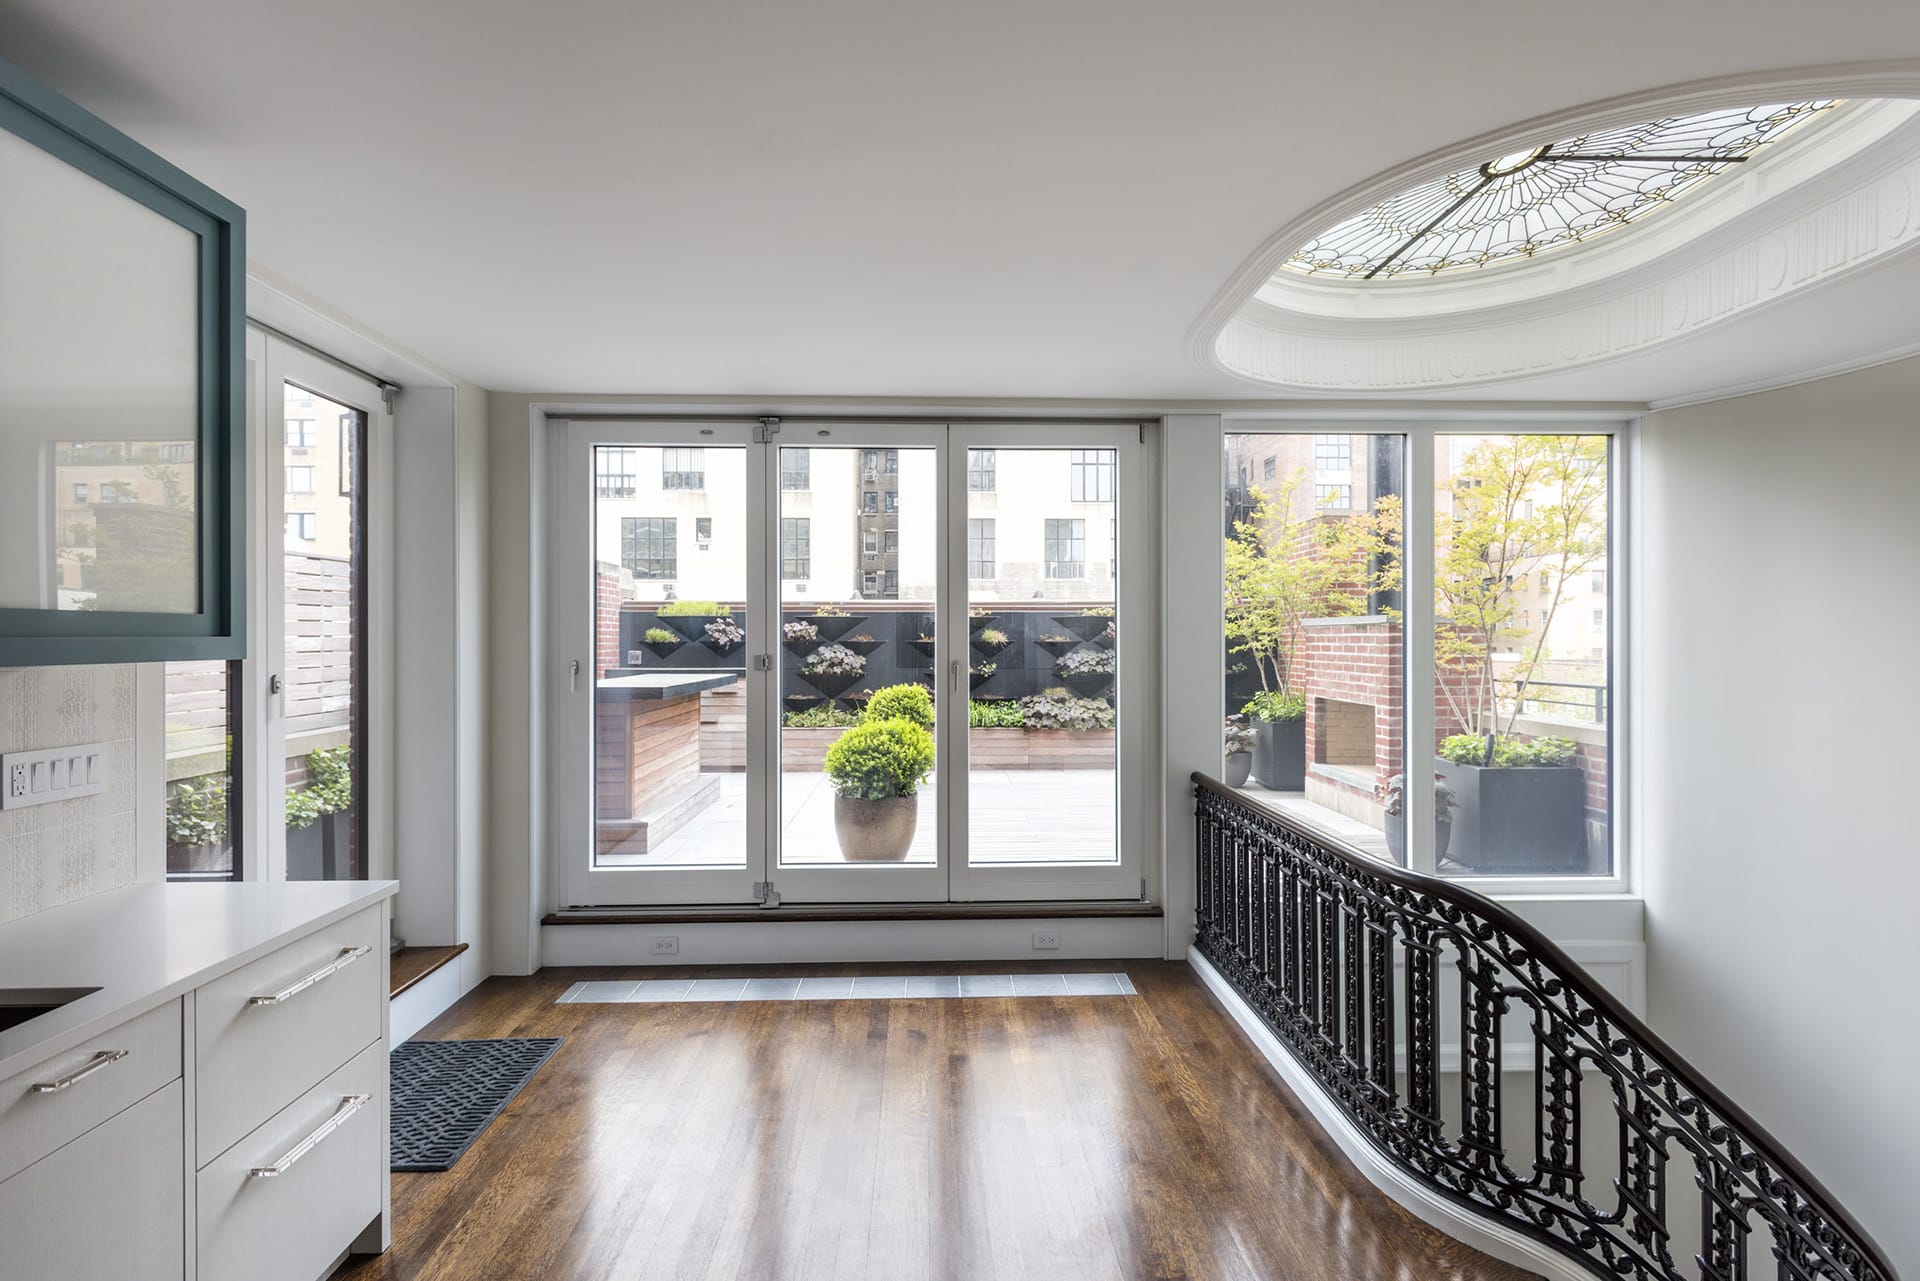 Interior of an Upper West Side penthouse with a view onto the roof deck through large folding glass doors. A large leaded glass skylight is located at the right of the frame.